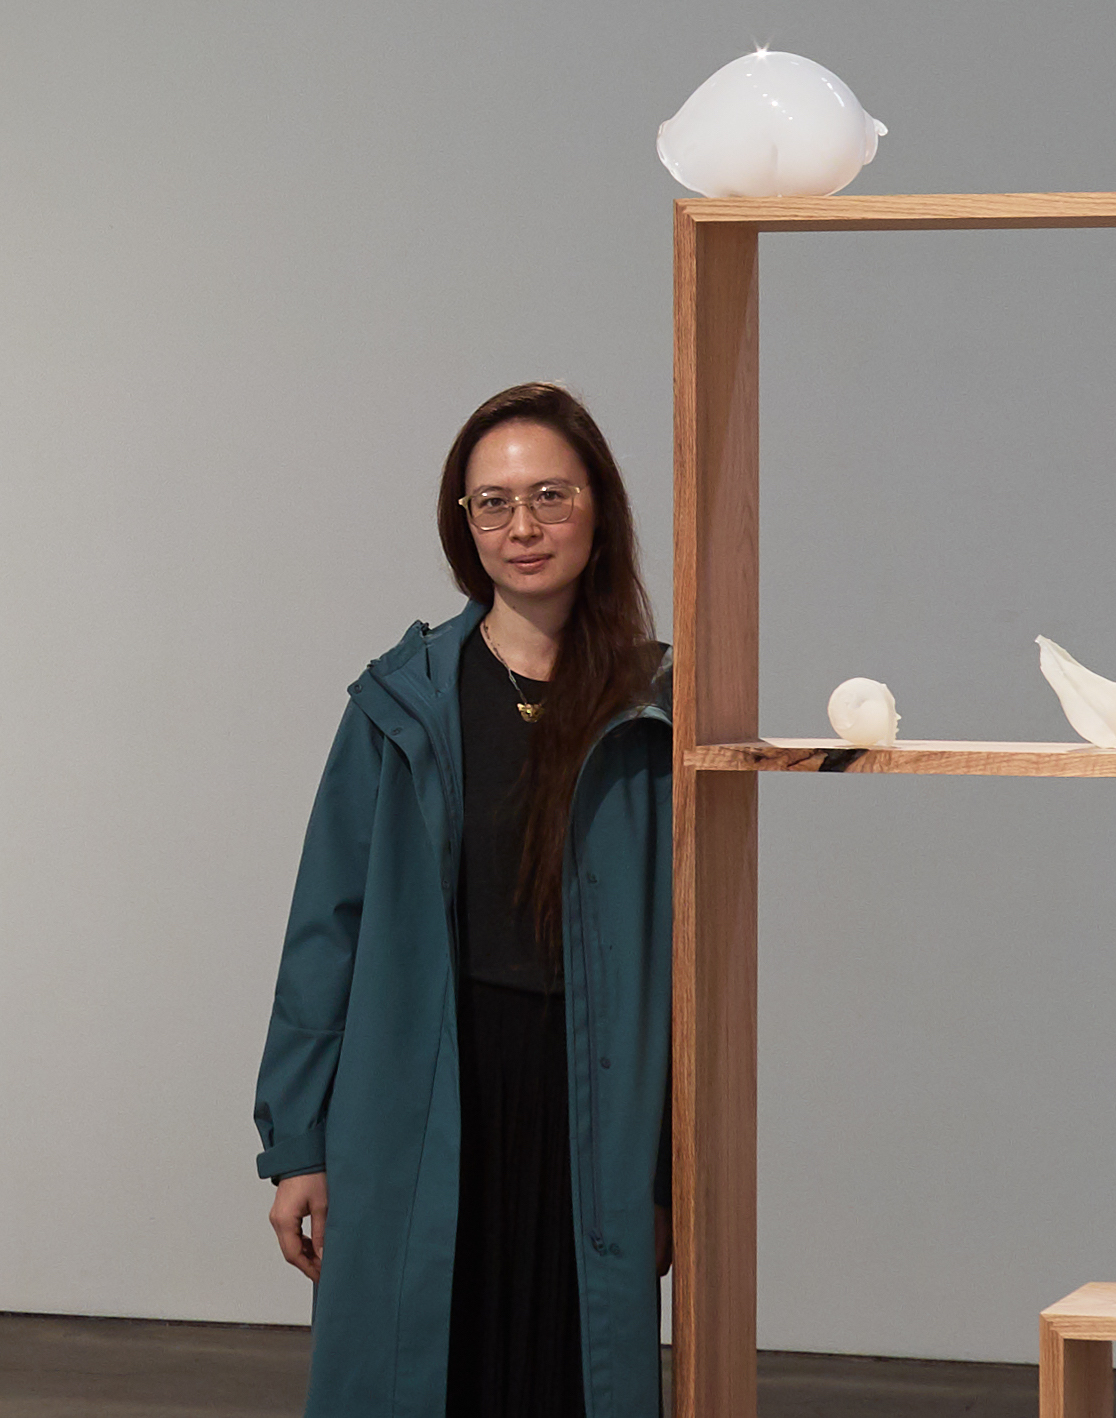 Woman with glasses and long dark hair wearing a blue/green jacket and black dress leaning against a wooden shelf displaying glass sculptures